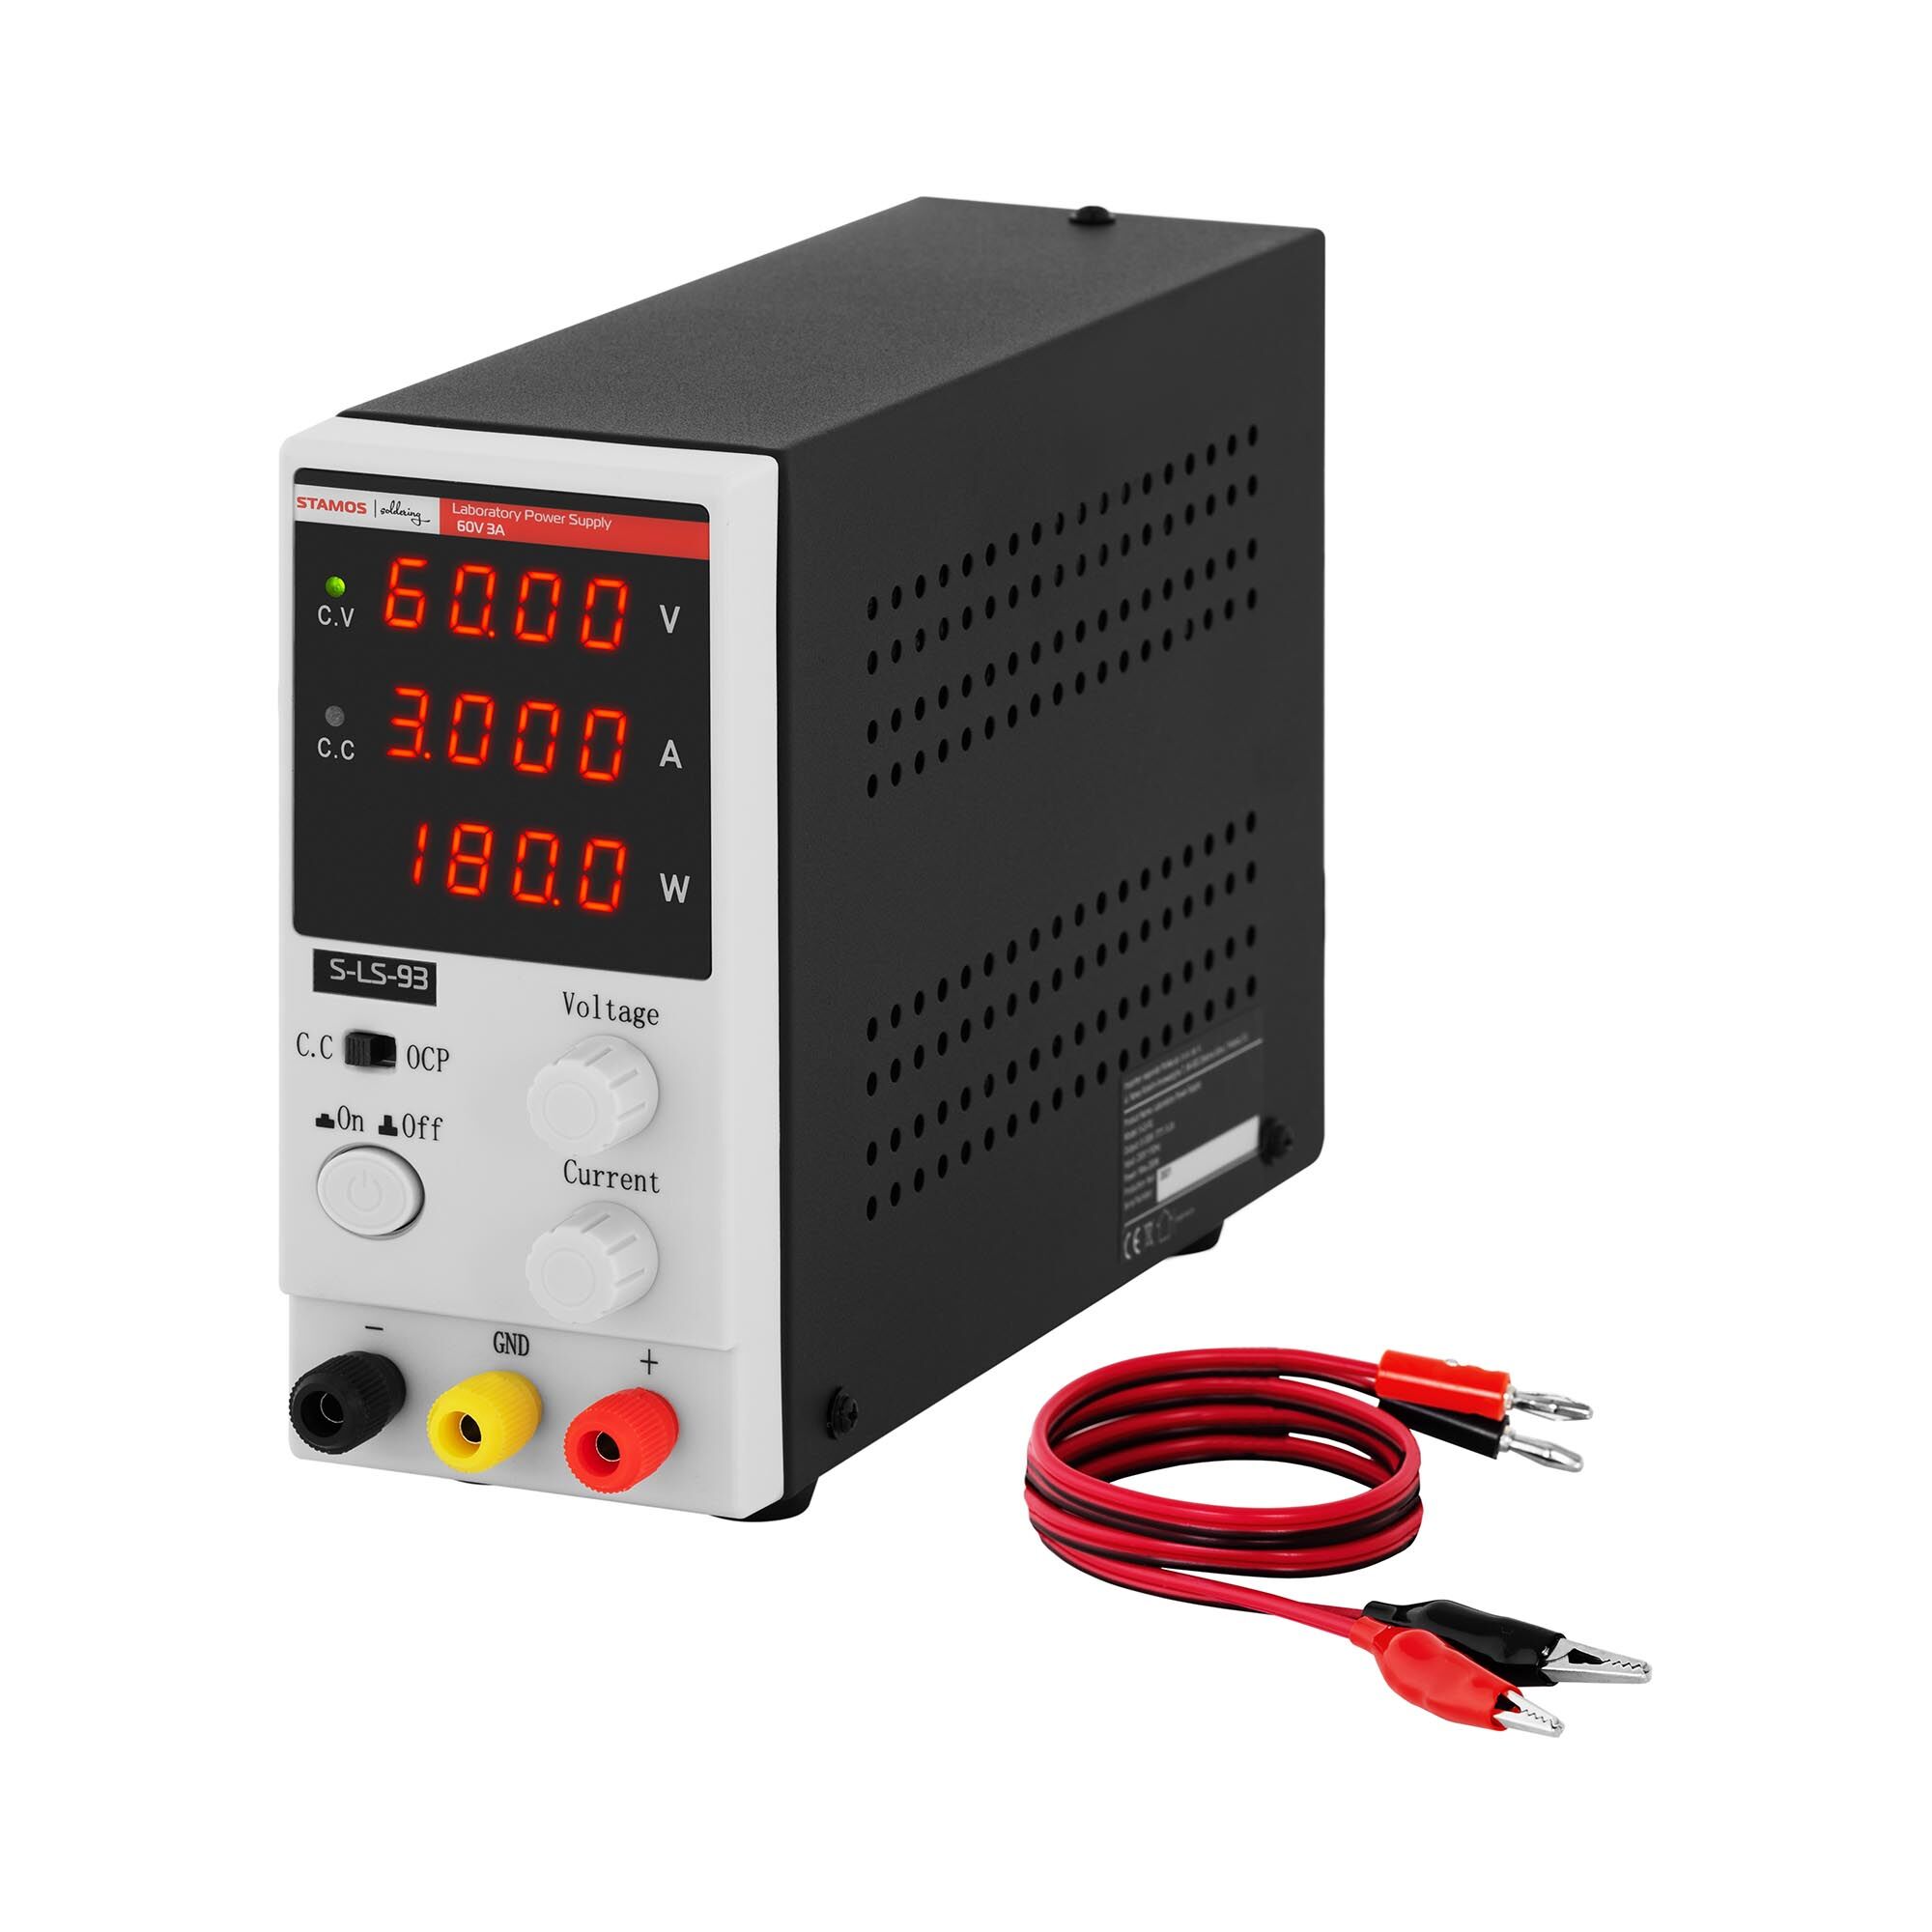 Stamos Soldering Bench Power Supply - 0 - 60 V - 0 - 3 A DC - 180 W - 4-digit LED display